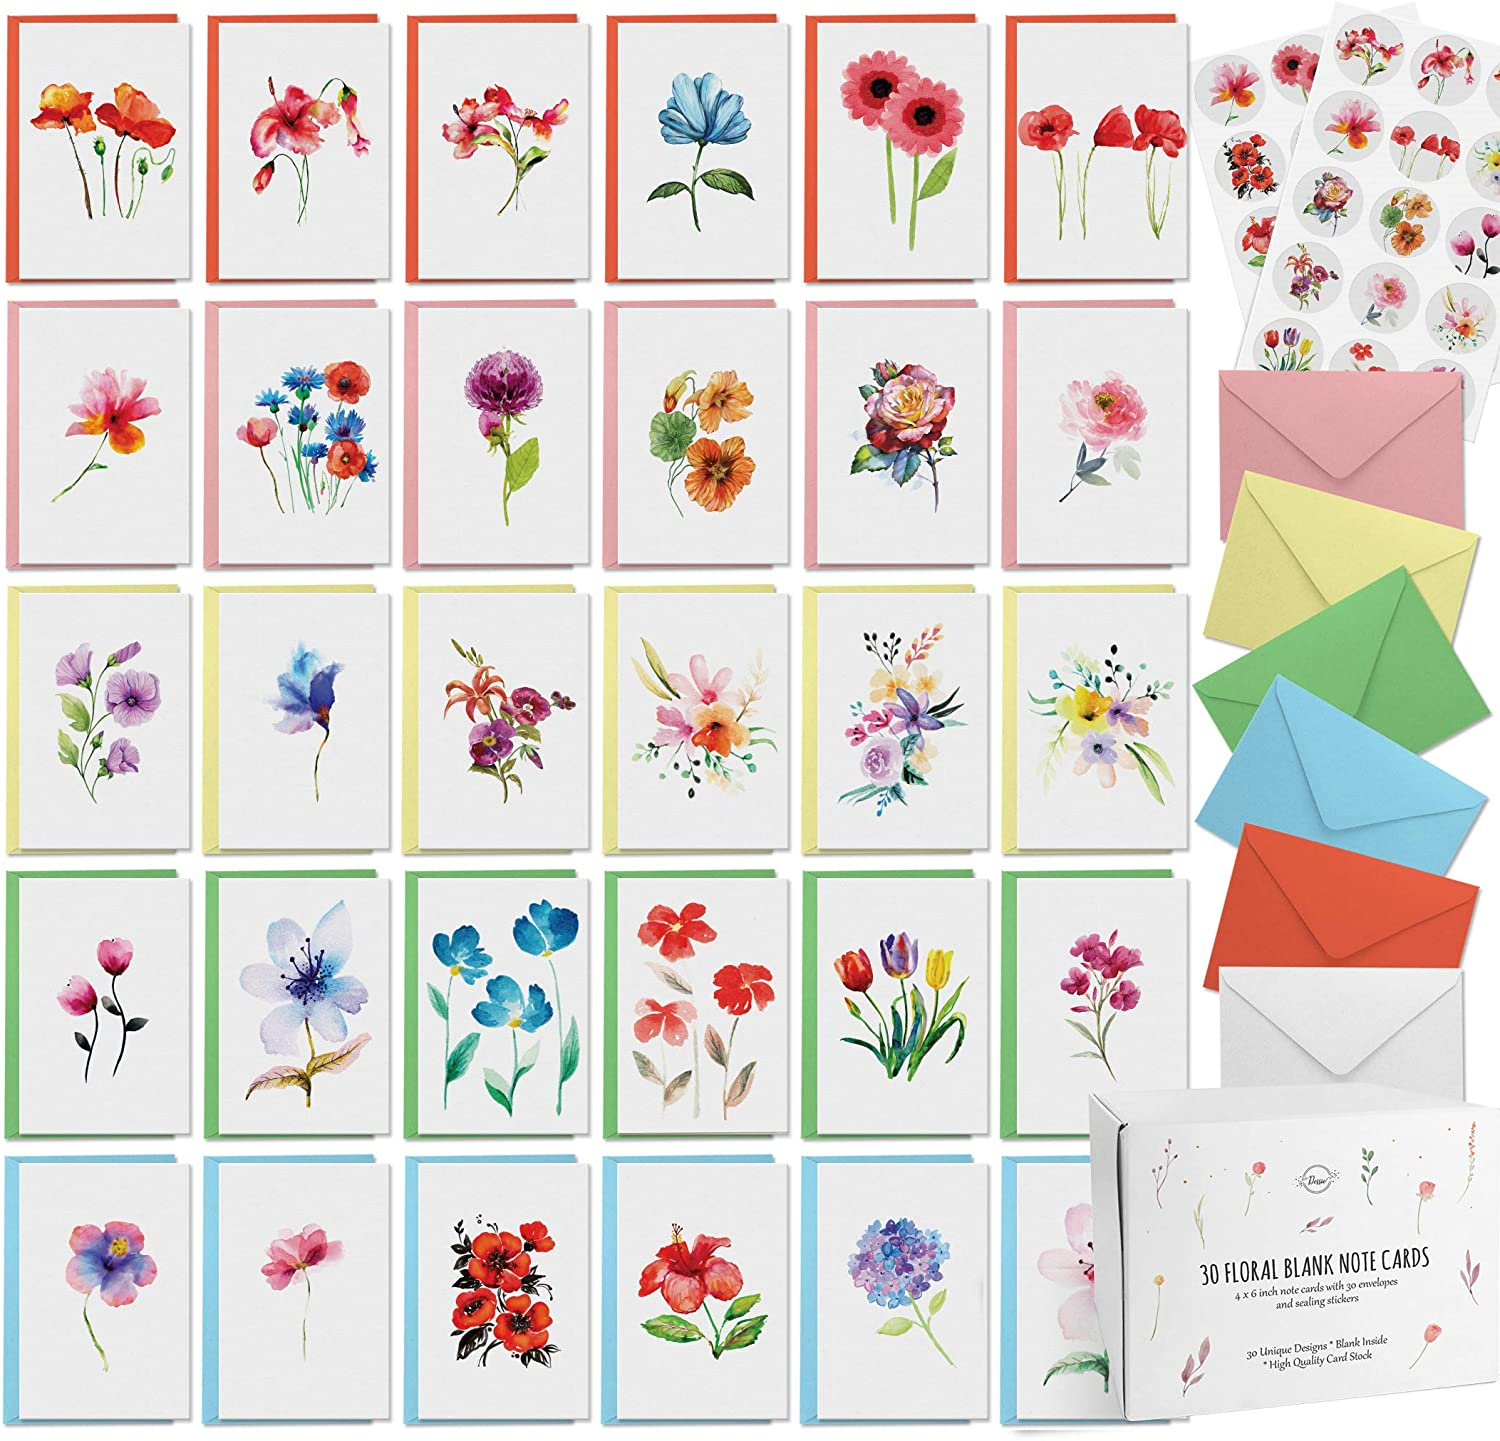 Dessie 30 Floral Watercolor Blank Cards with Envelopes - 30 Different 4x6 inch Blank Greeting Cards w/Assorted Color Envelopes & Matching Seals.